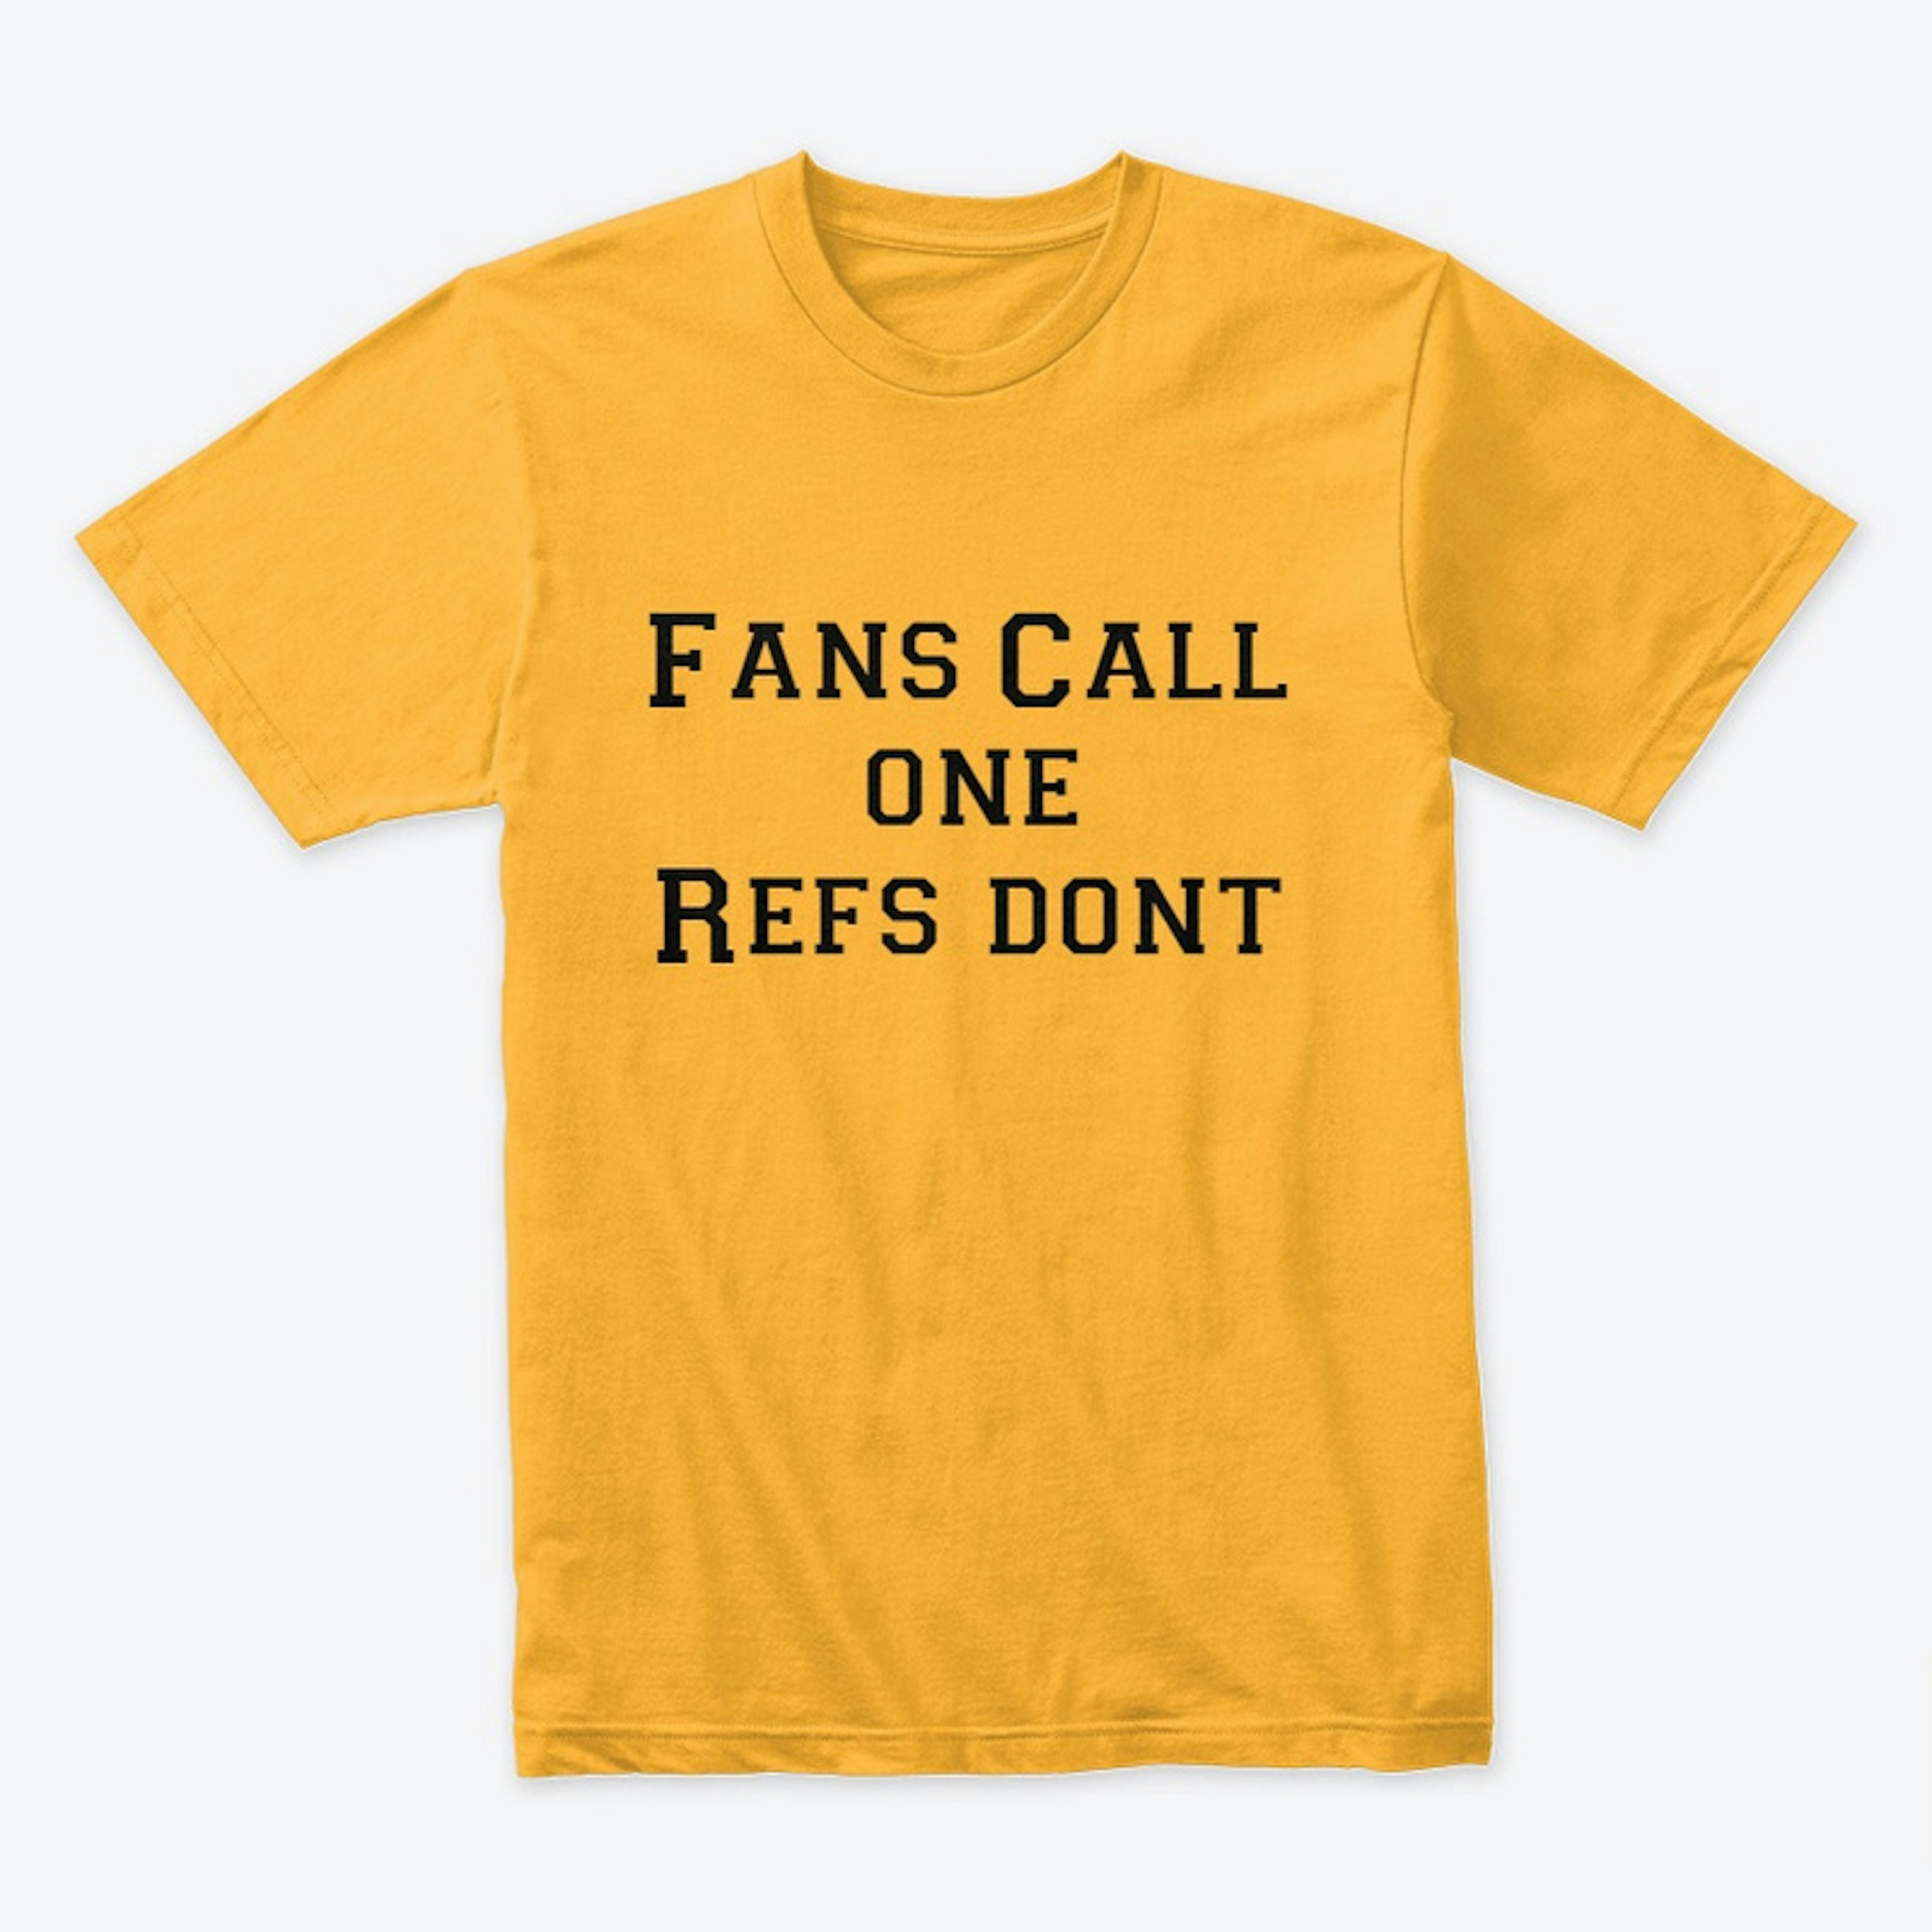 Fans call one